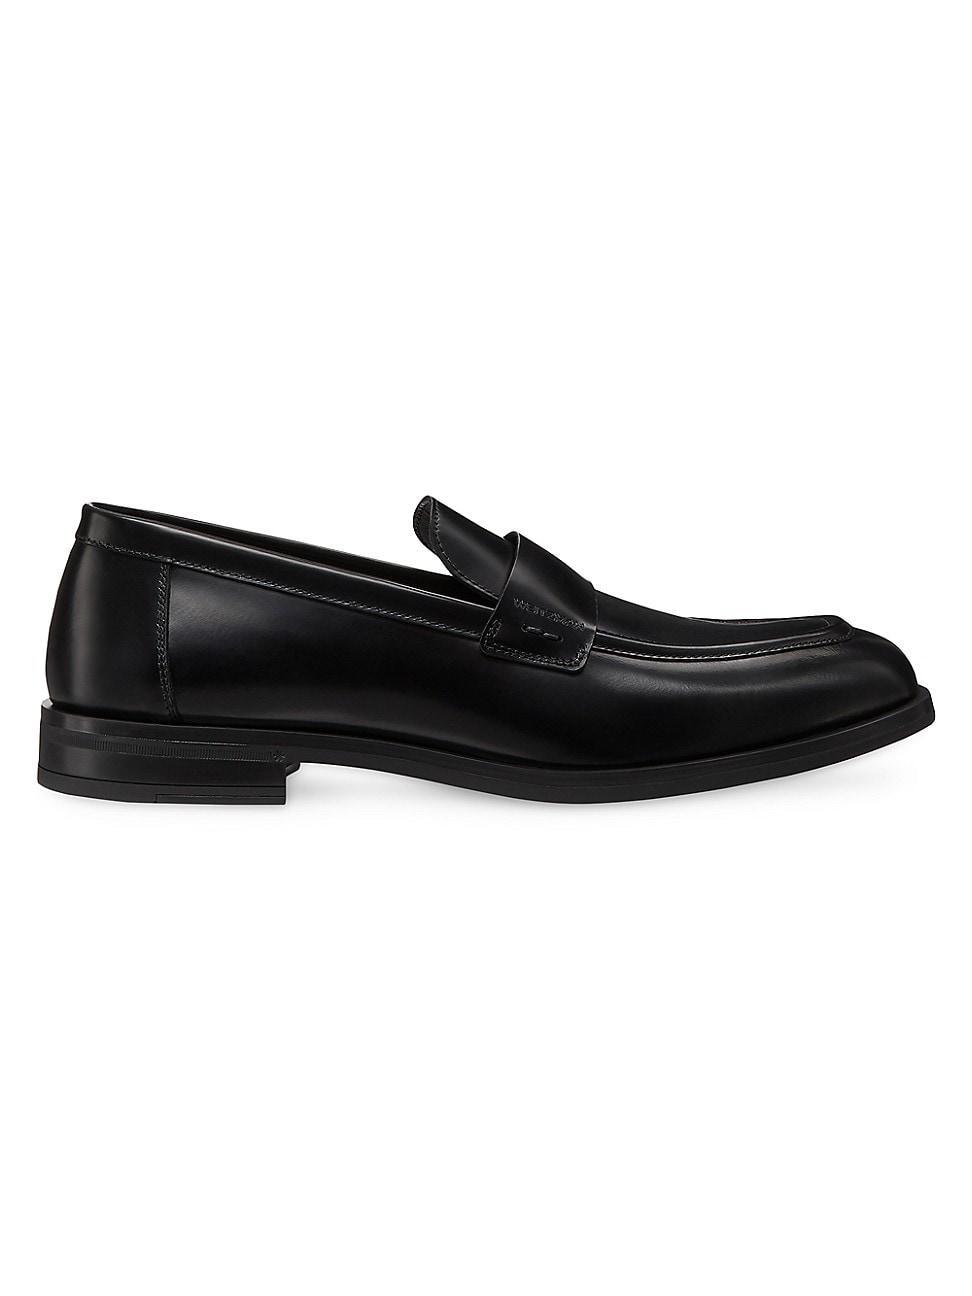 Mens Club Brushed Leather Slip-On Loafers Product Image